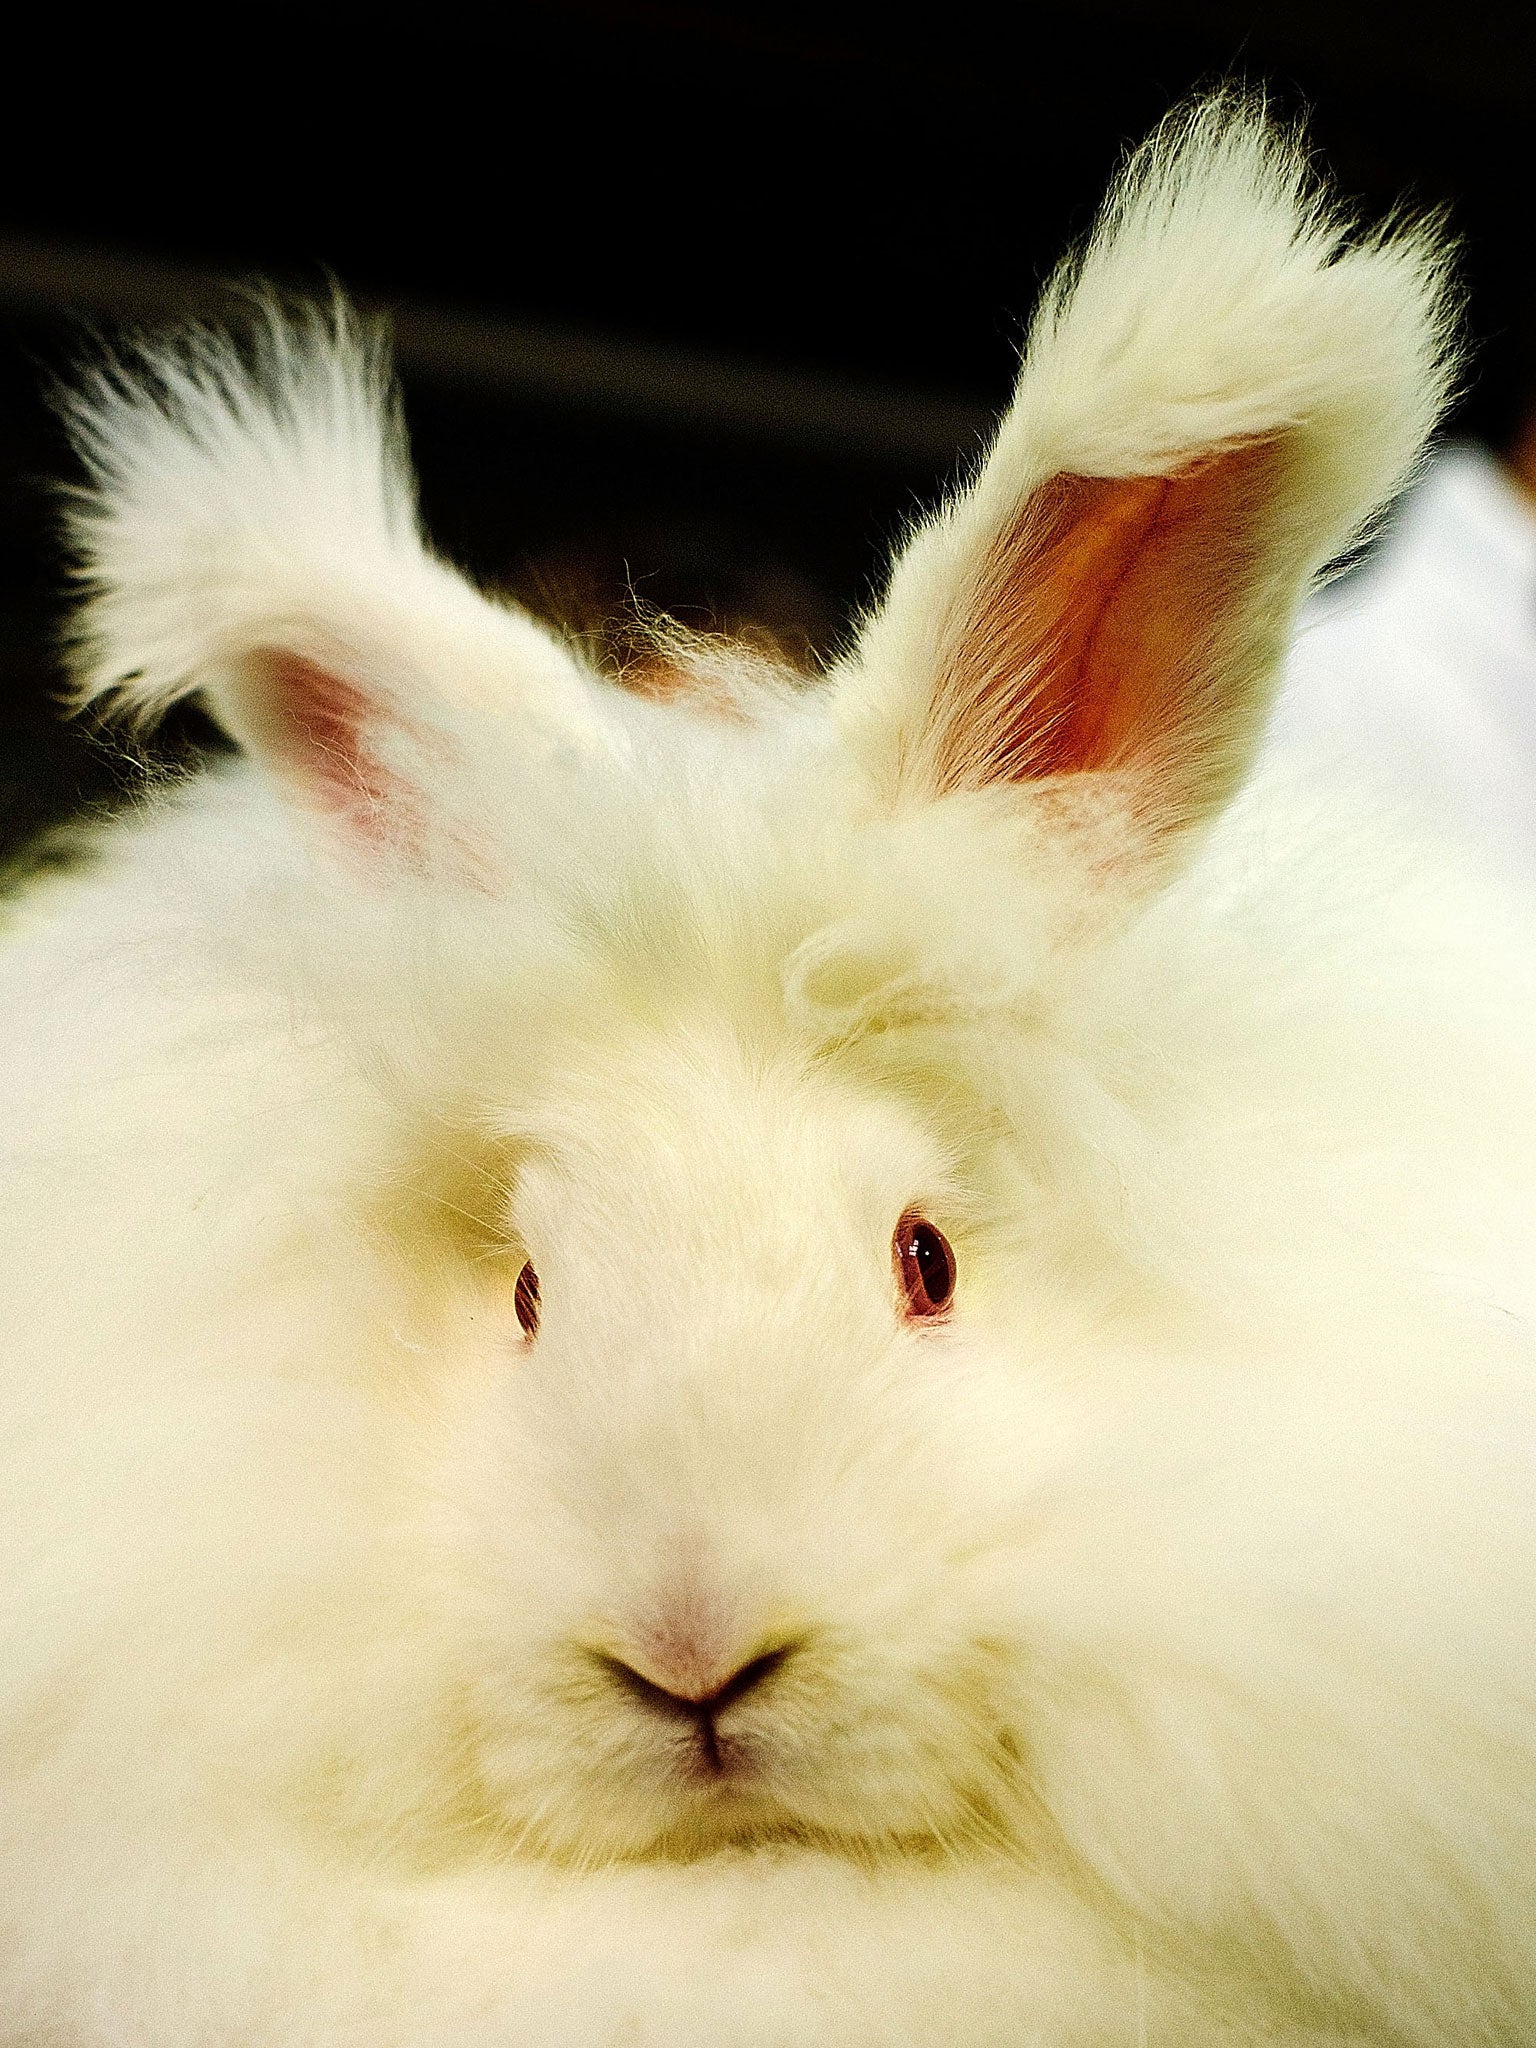 More shops ban the sale of angora wool after video exposes cruelty, The  Independent